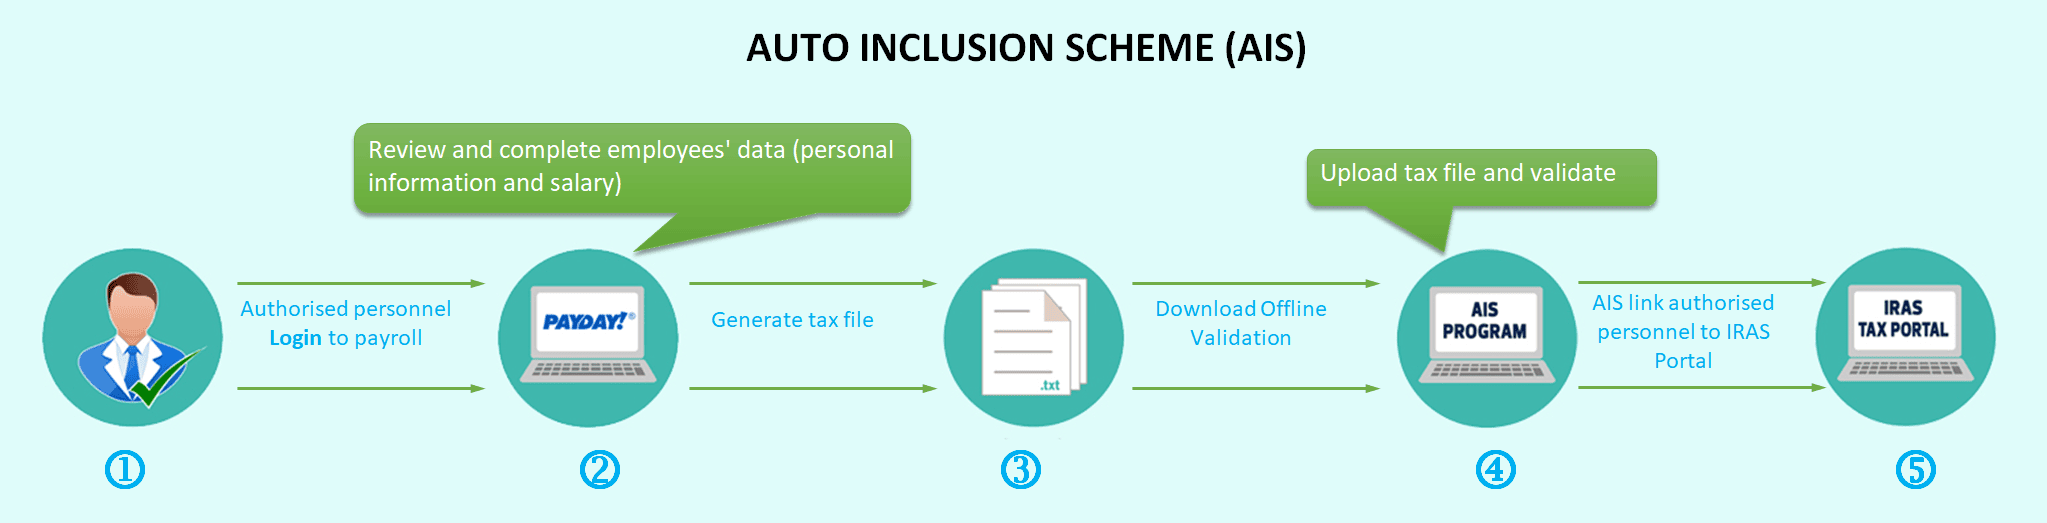 Step by step guide on how to perform the submission for employment income under Auto Inclusion Scheme